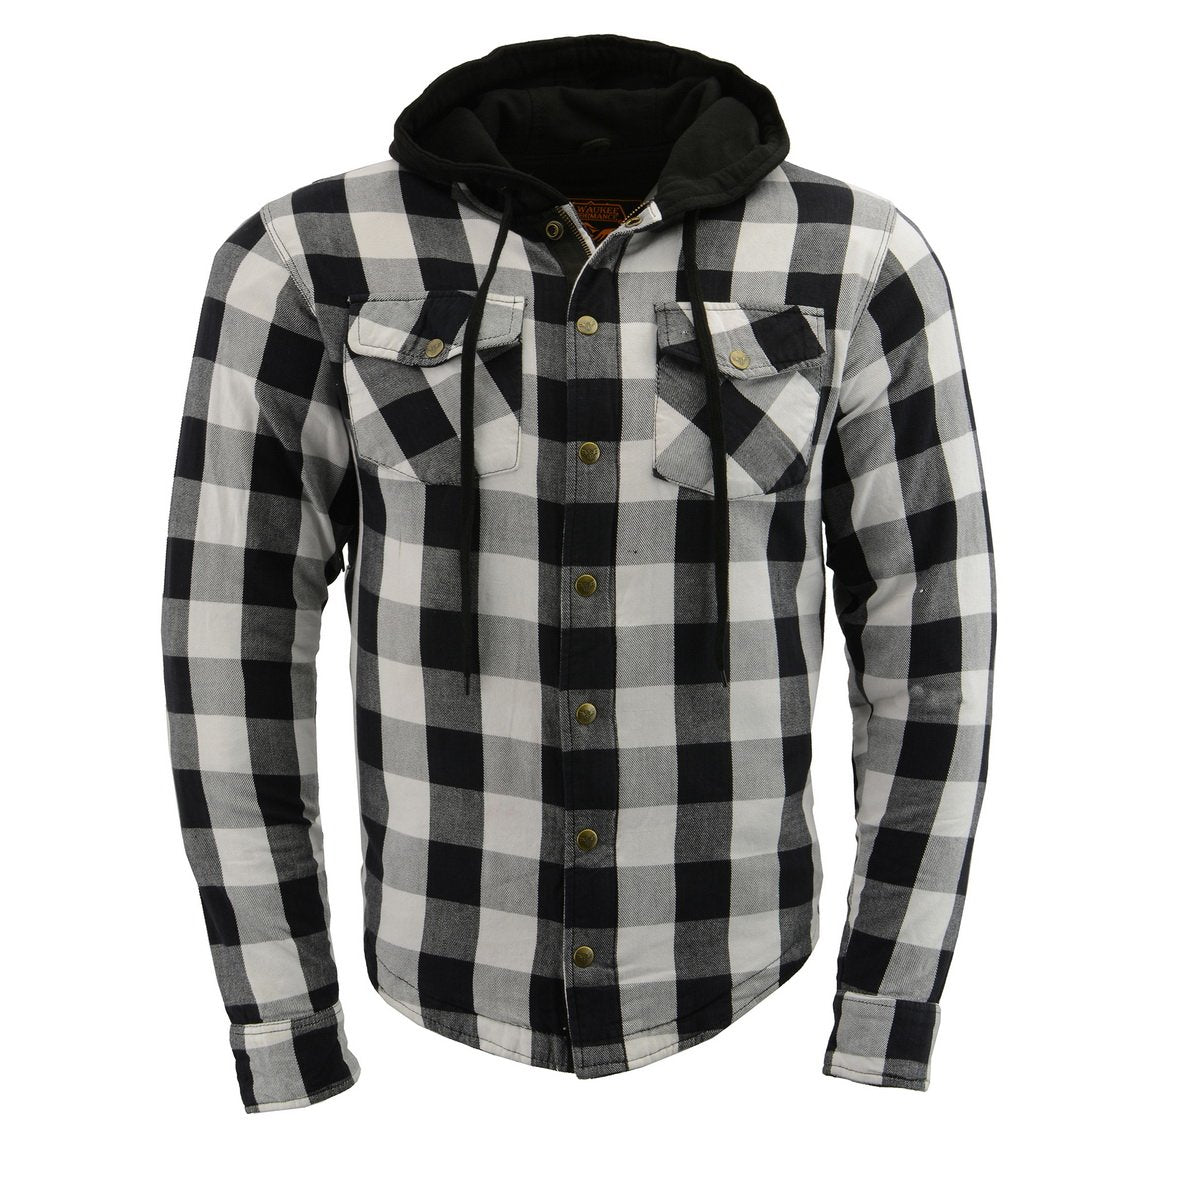 Milwaukee Performance MPM1629 Men's Black and White Armored Hooded Flannel Shirt with Aramid by DuPont Fibers